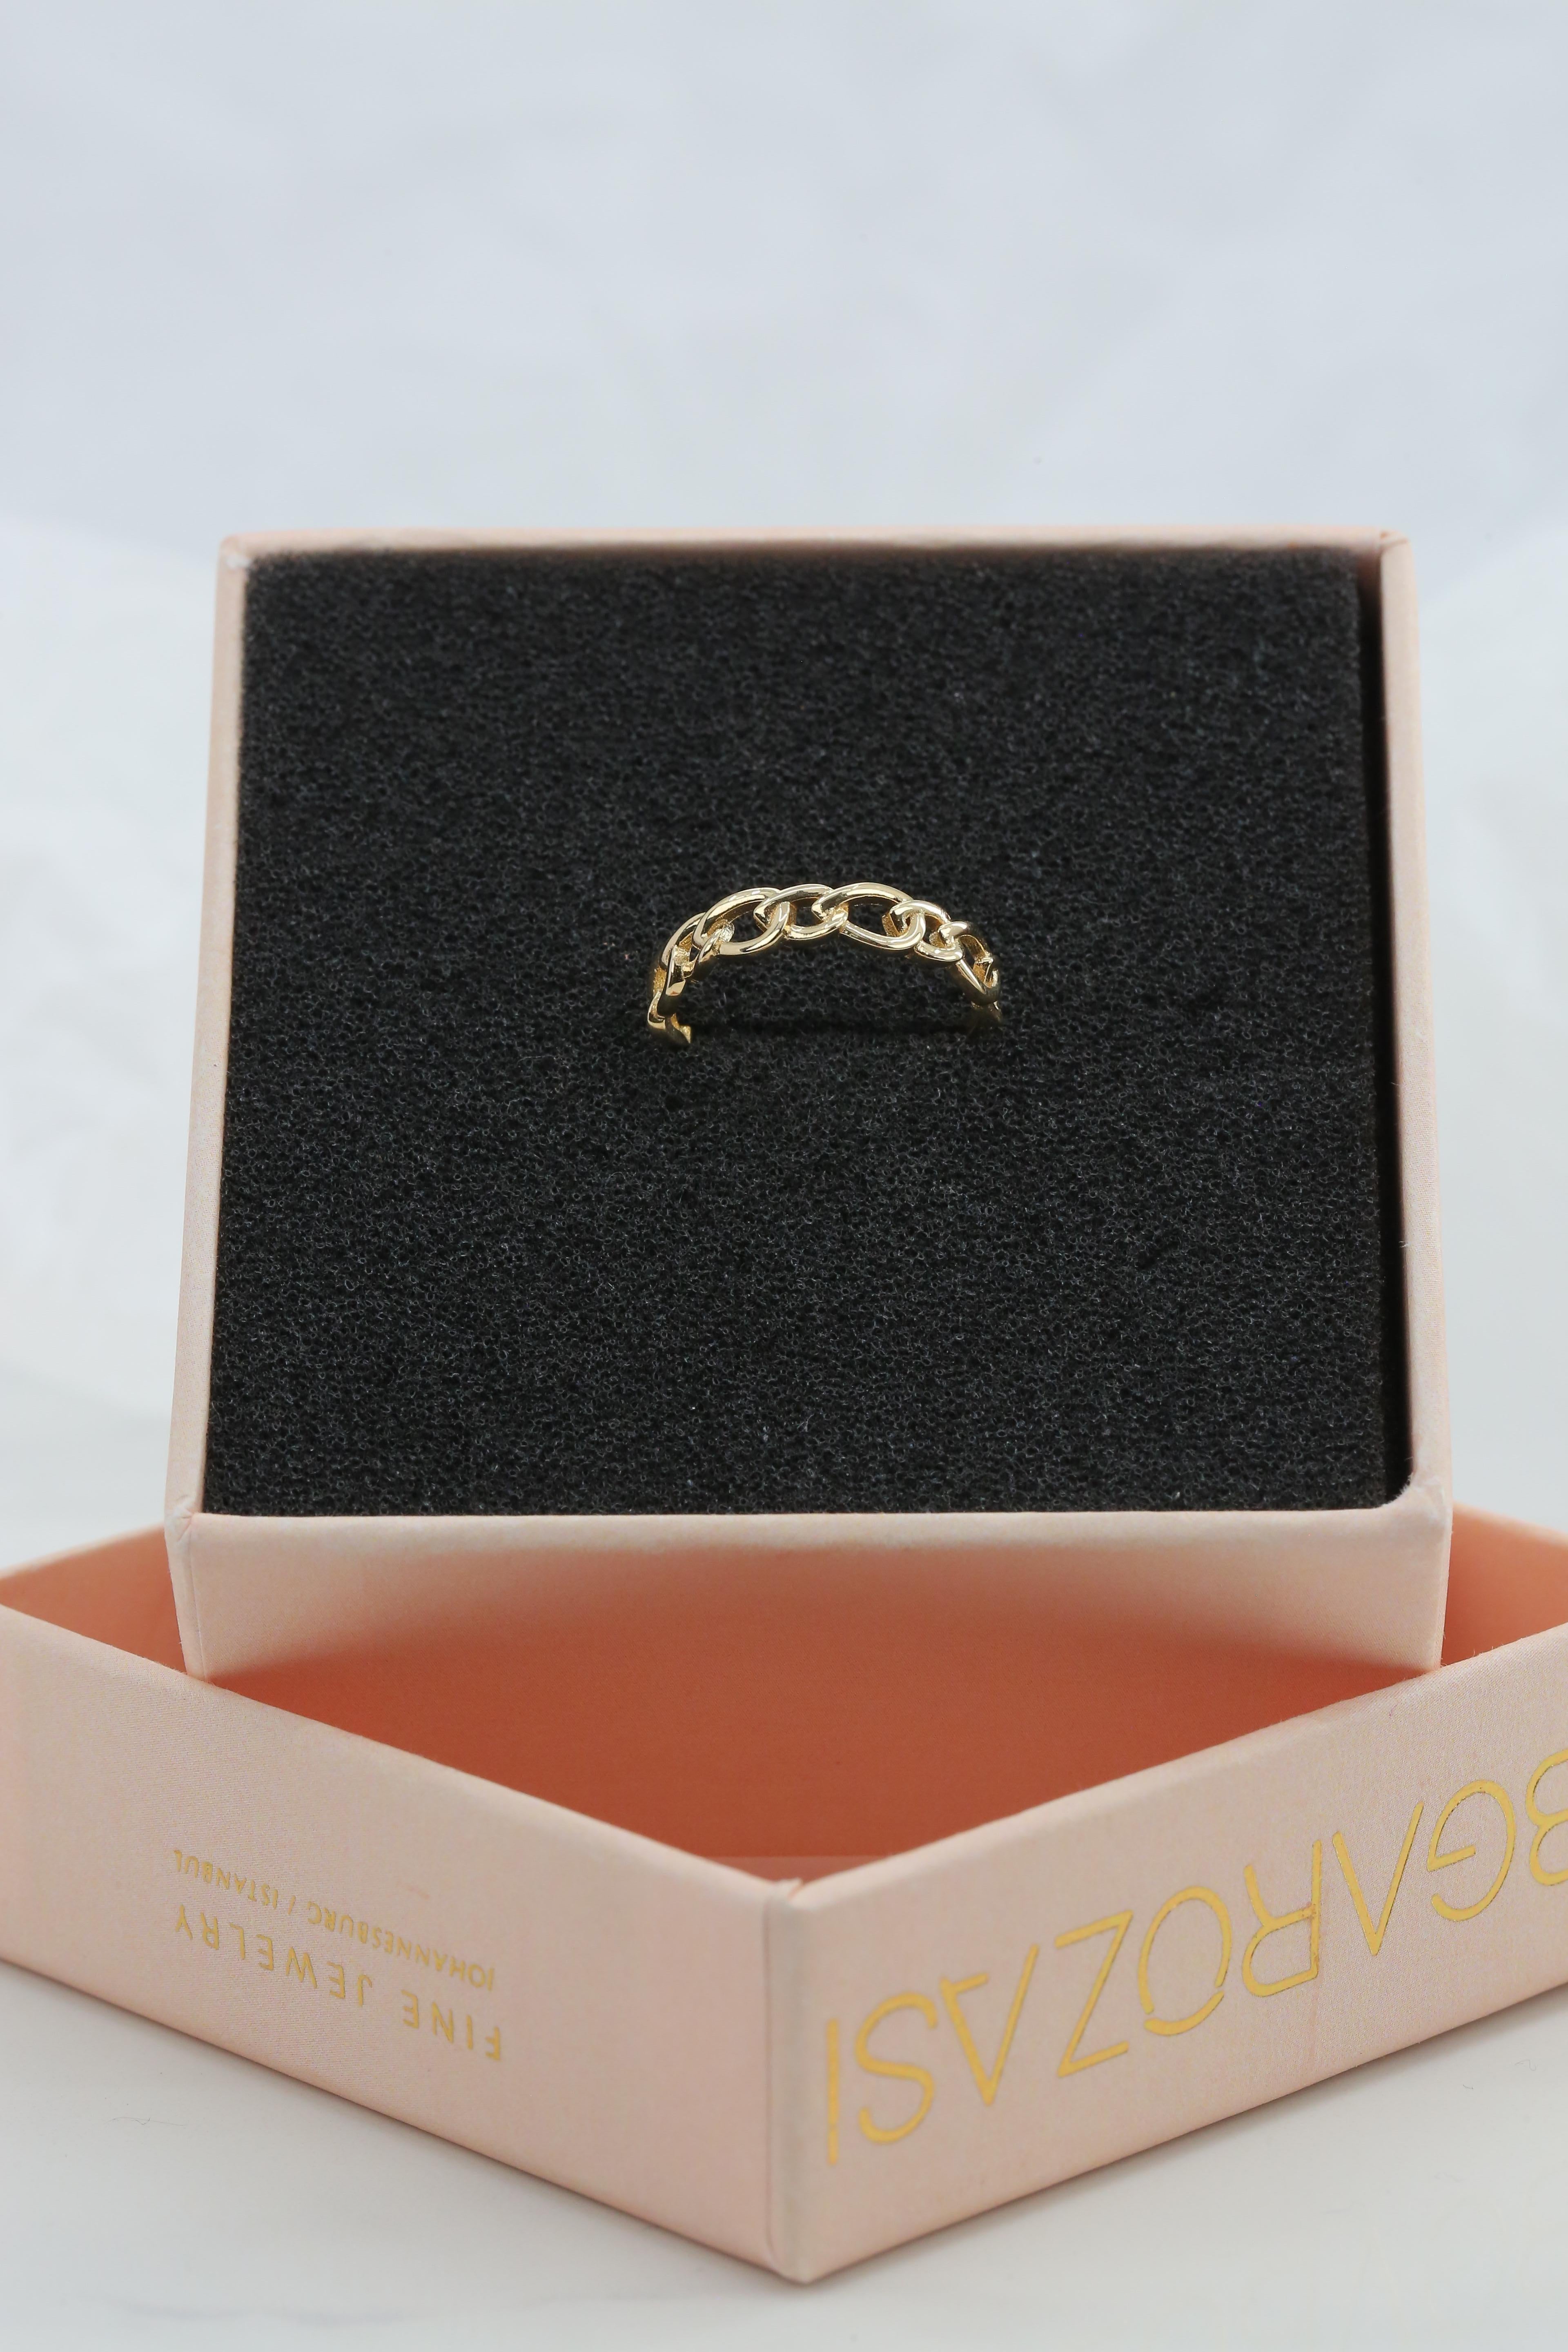 For Sale:  14K Gold Chain Link Ring, Modern Minimal Ring, Pinky Ring 4